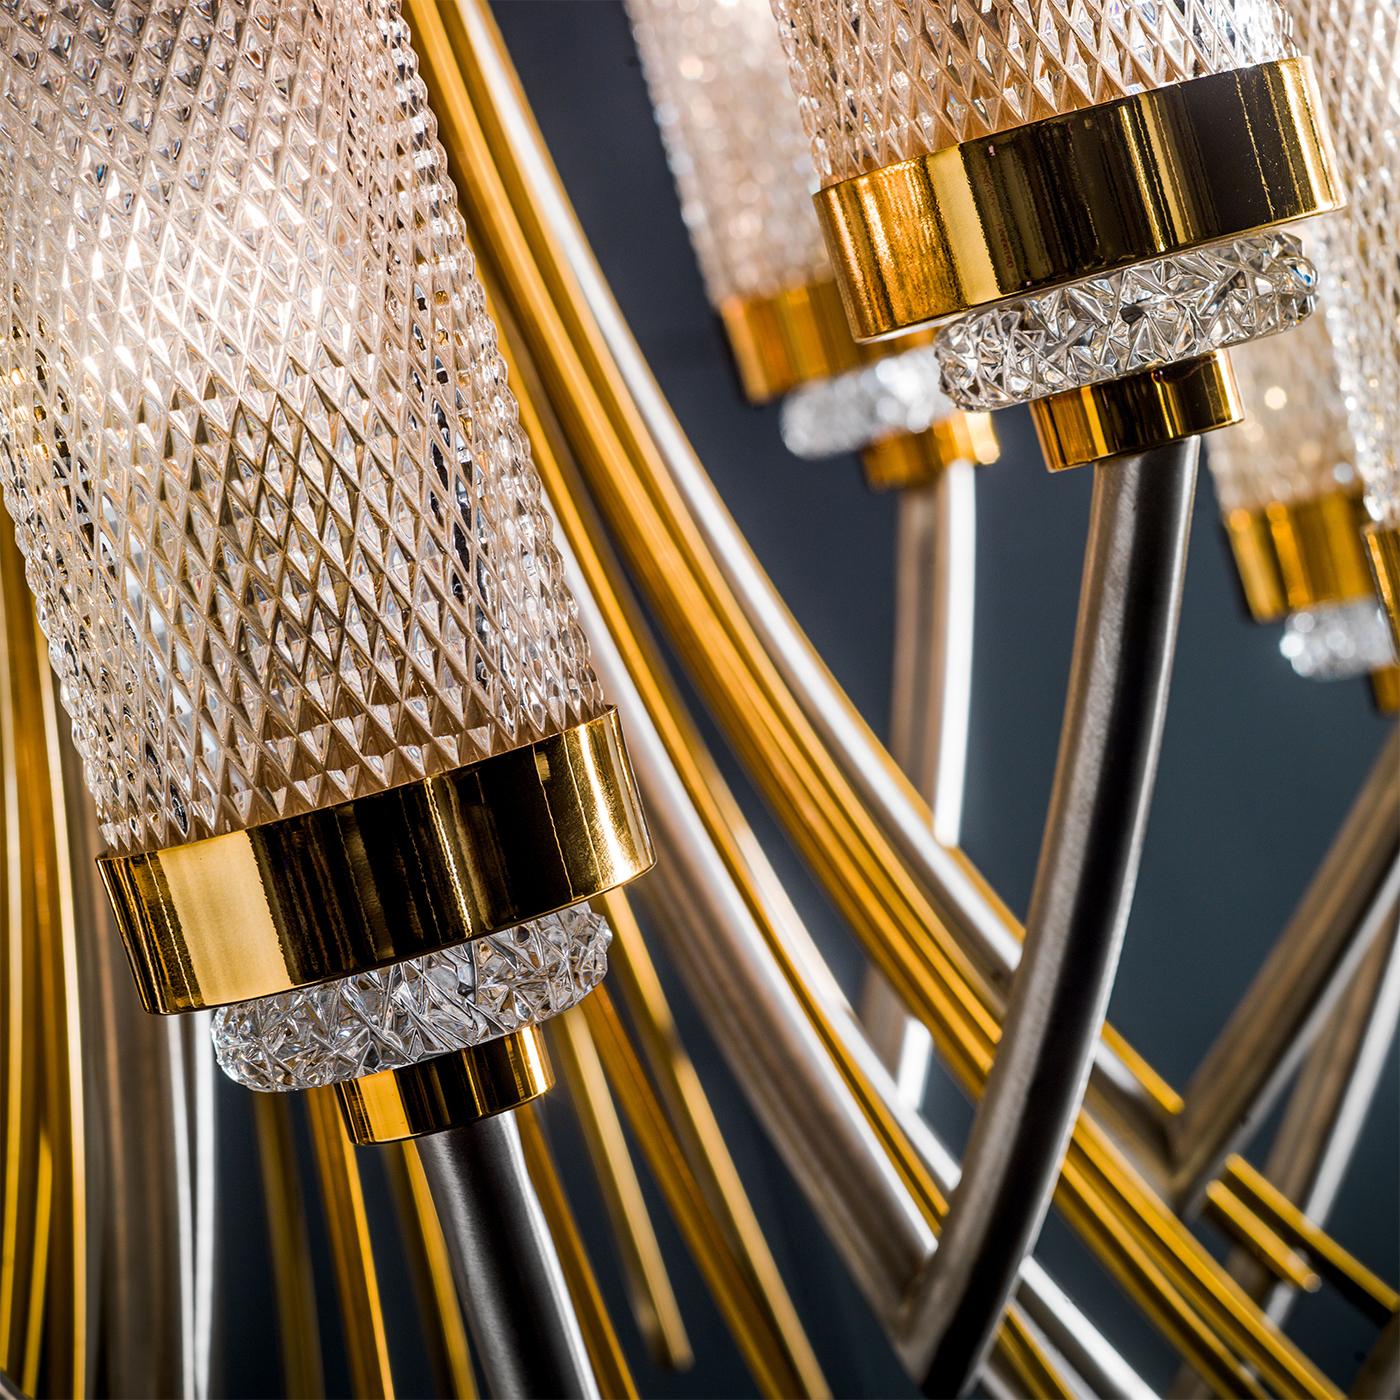 Add elegance, opulence and superior illumination to practically any space with this modern and stylish chandelier. The brass structure is in flash gold and satin nickel finish, while the multiple heads are in hand faceted crystal, providing warm